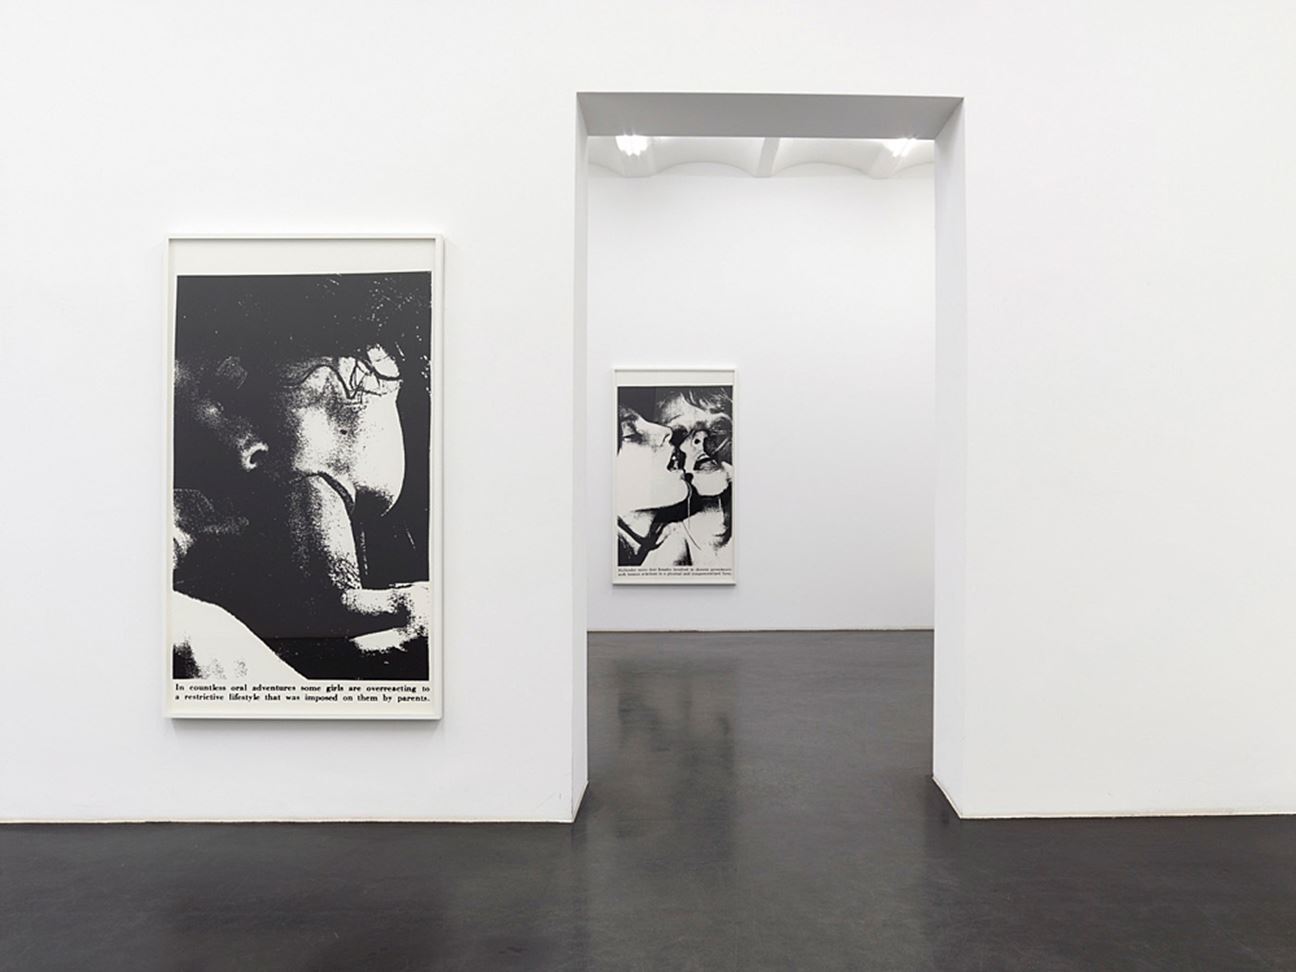 Lutz Bacher, Sex with Strangers, 1986 at Galerie Buchholz, Cologne, Germany on 9 Apr–31 May 2014 Ocula